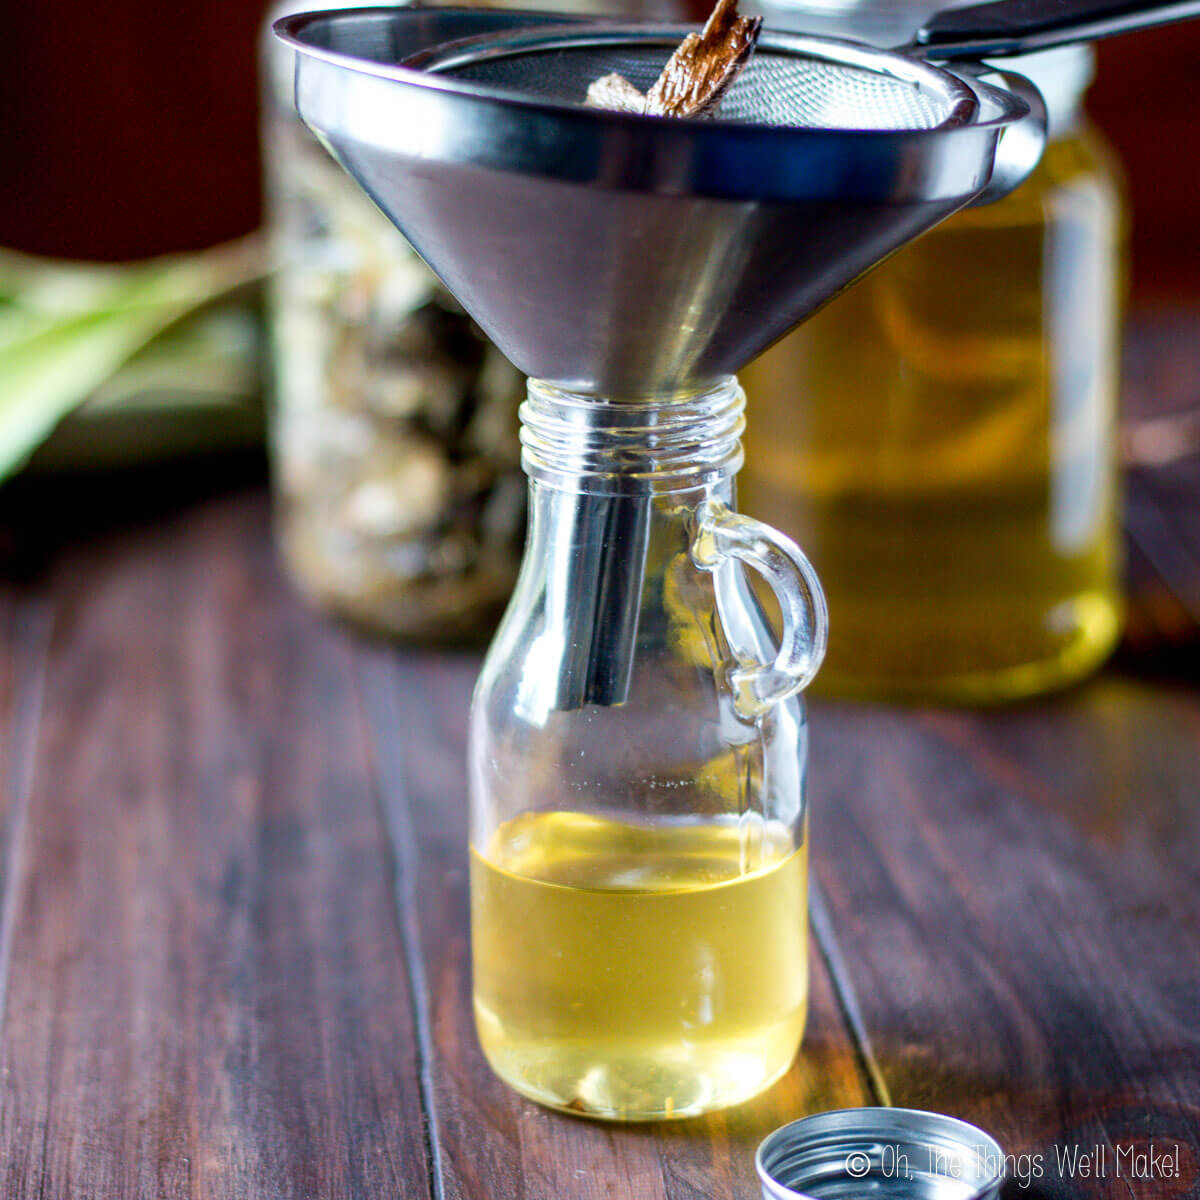 Why and How to Make Aloe Oil - Oh, The Things We'll Make!